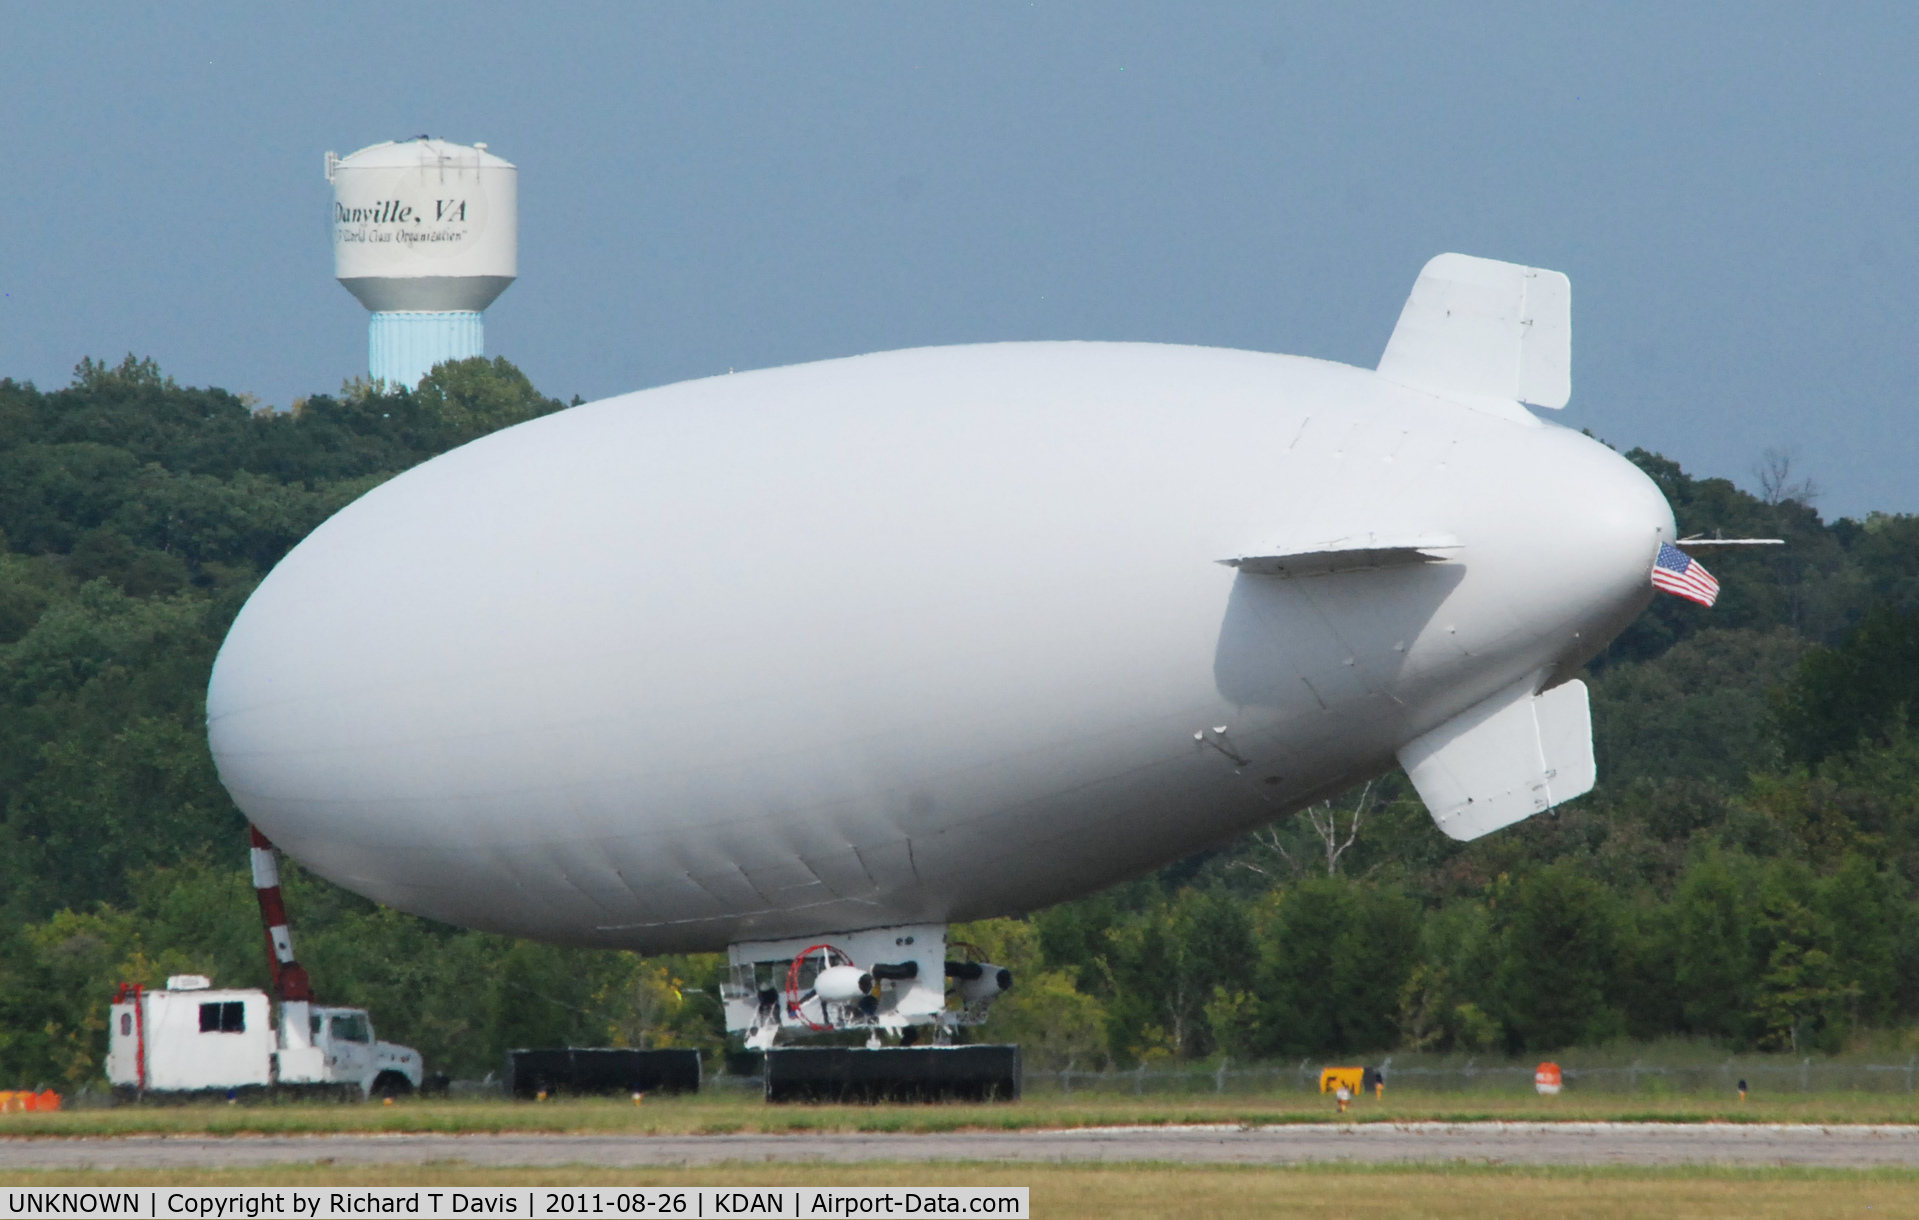 UNKNOWN, Various Airships C/N unknown, Navy Blimp found shelter In Danville Va. away from Hurricane Irene moving up the east coast August 26,2011. After flying over Danville letting everyone see that she has arrived the quiet running lady quietly settled down for her several days stay till sh